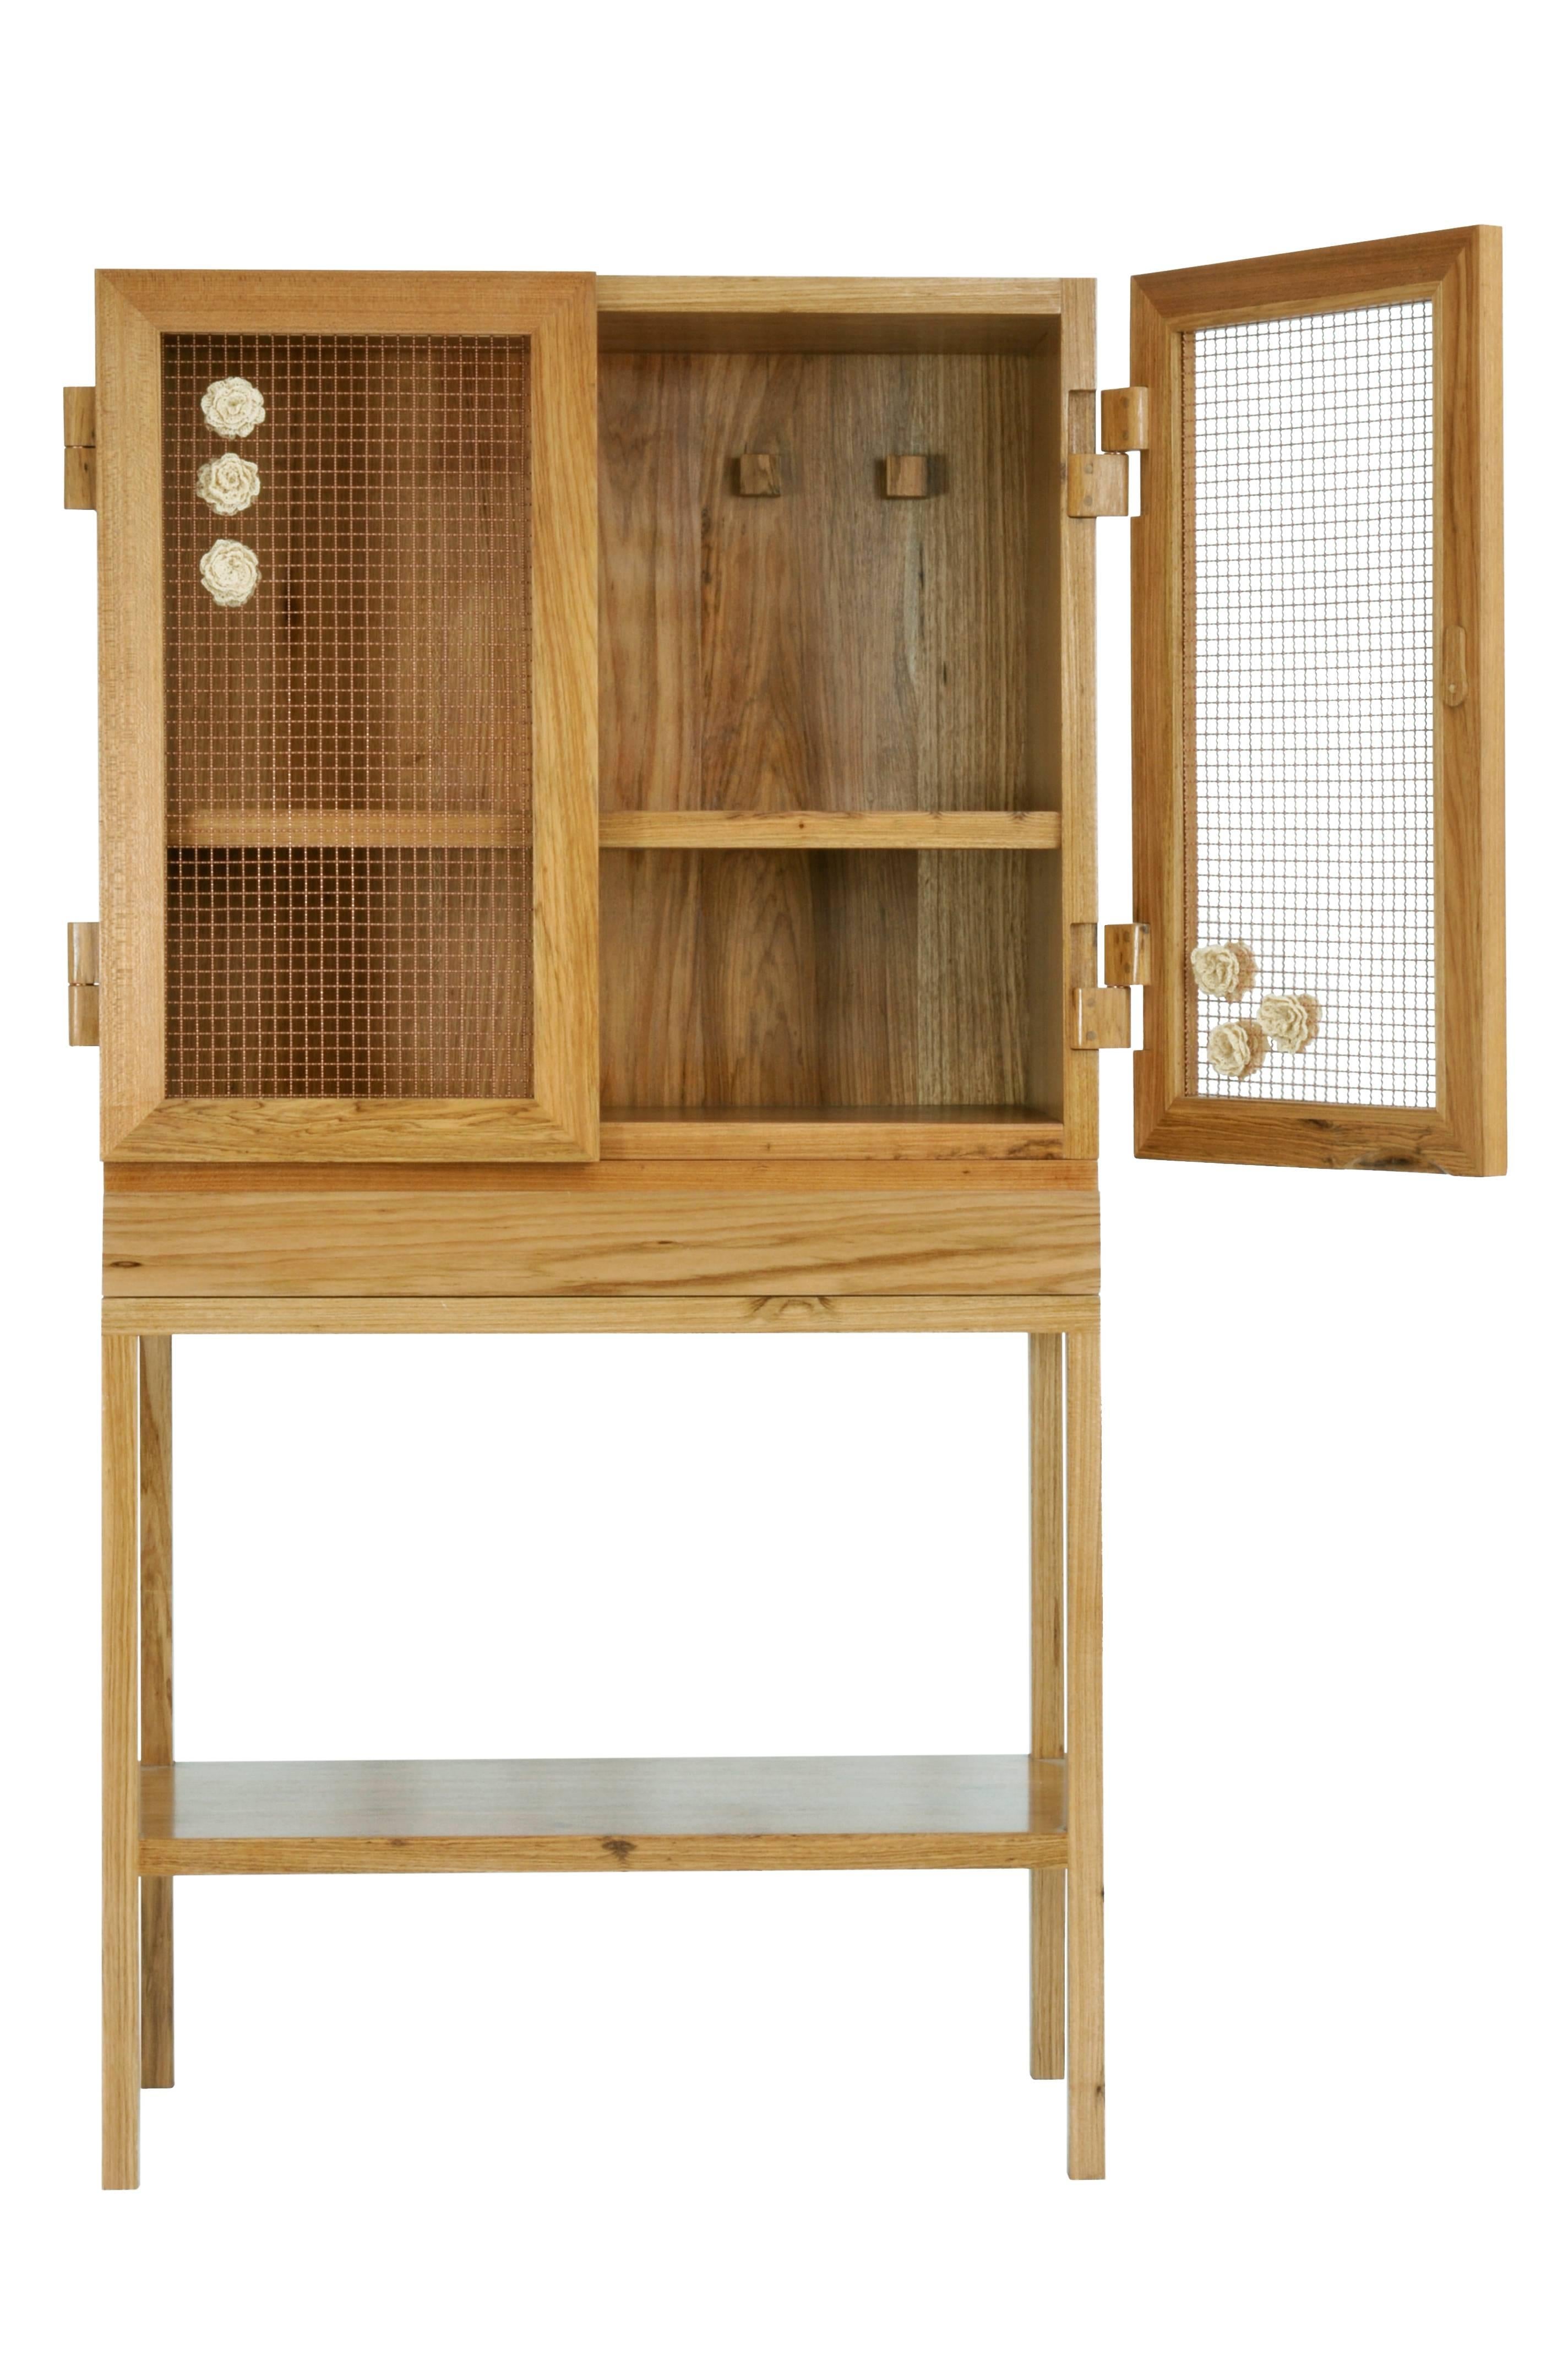 The Jardim cabinet is made of solid Brazilian walnut wood (Freijo´). Its doors are made of copper threads and decorated with handmade crochet flowers using cotton threads in three different colors. 

The threads are naturally colored using fruits